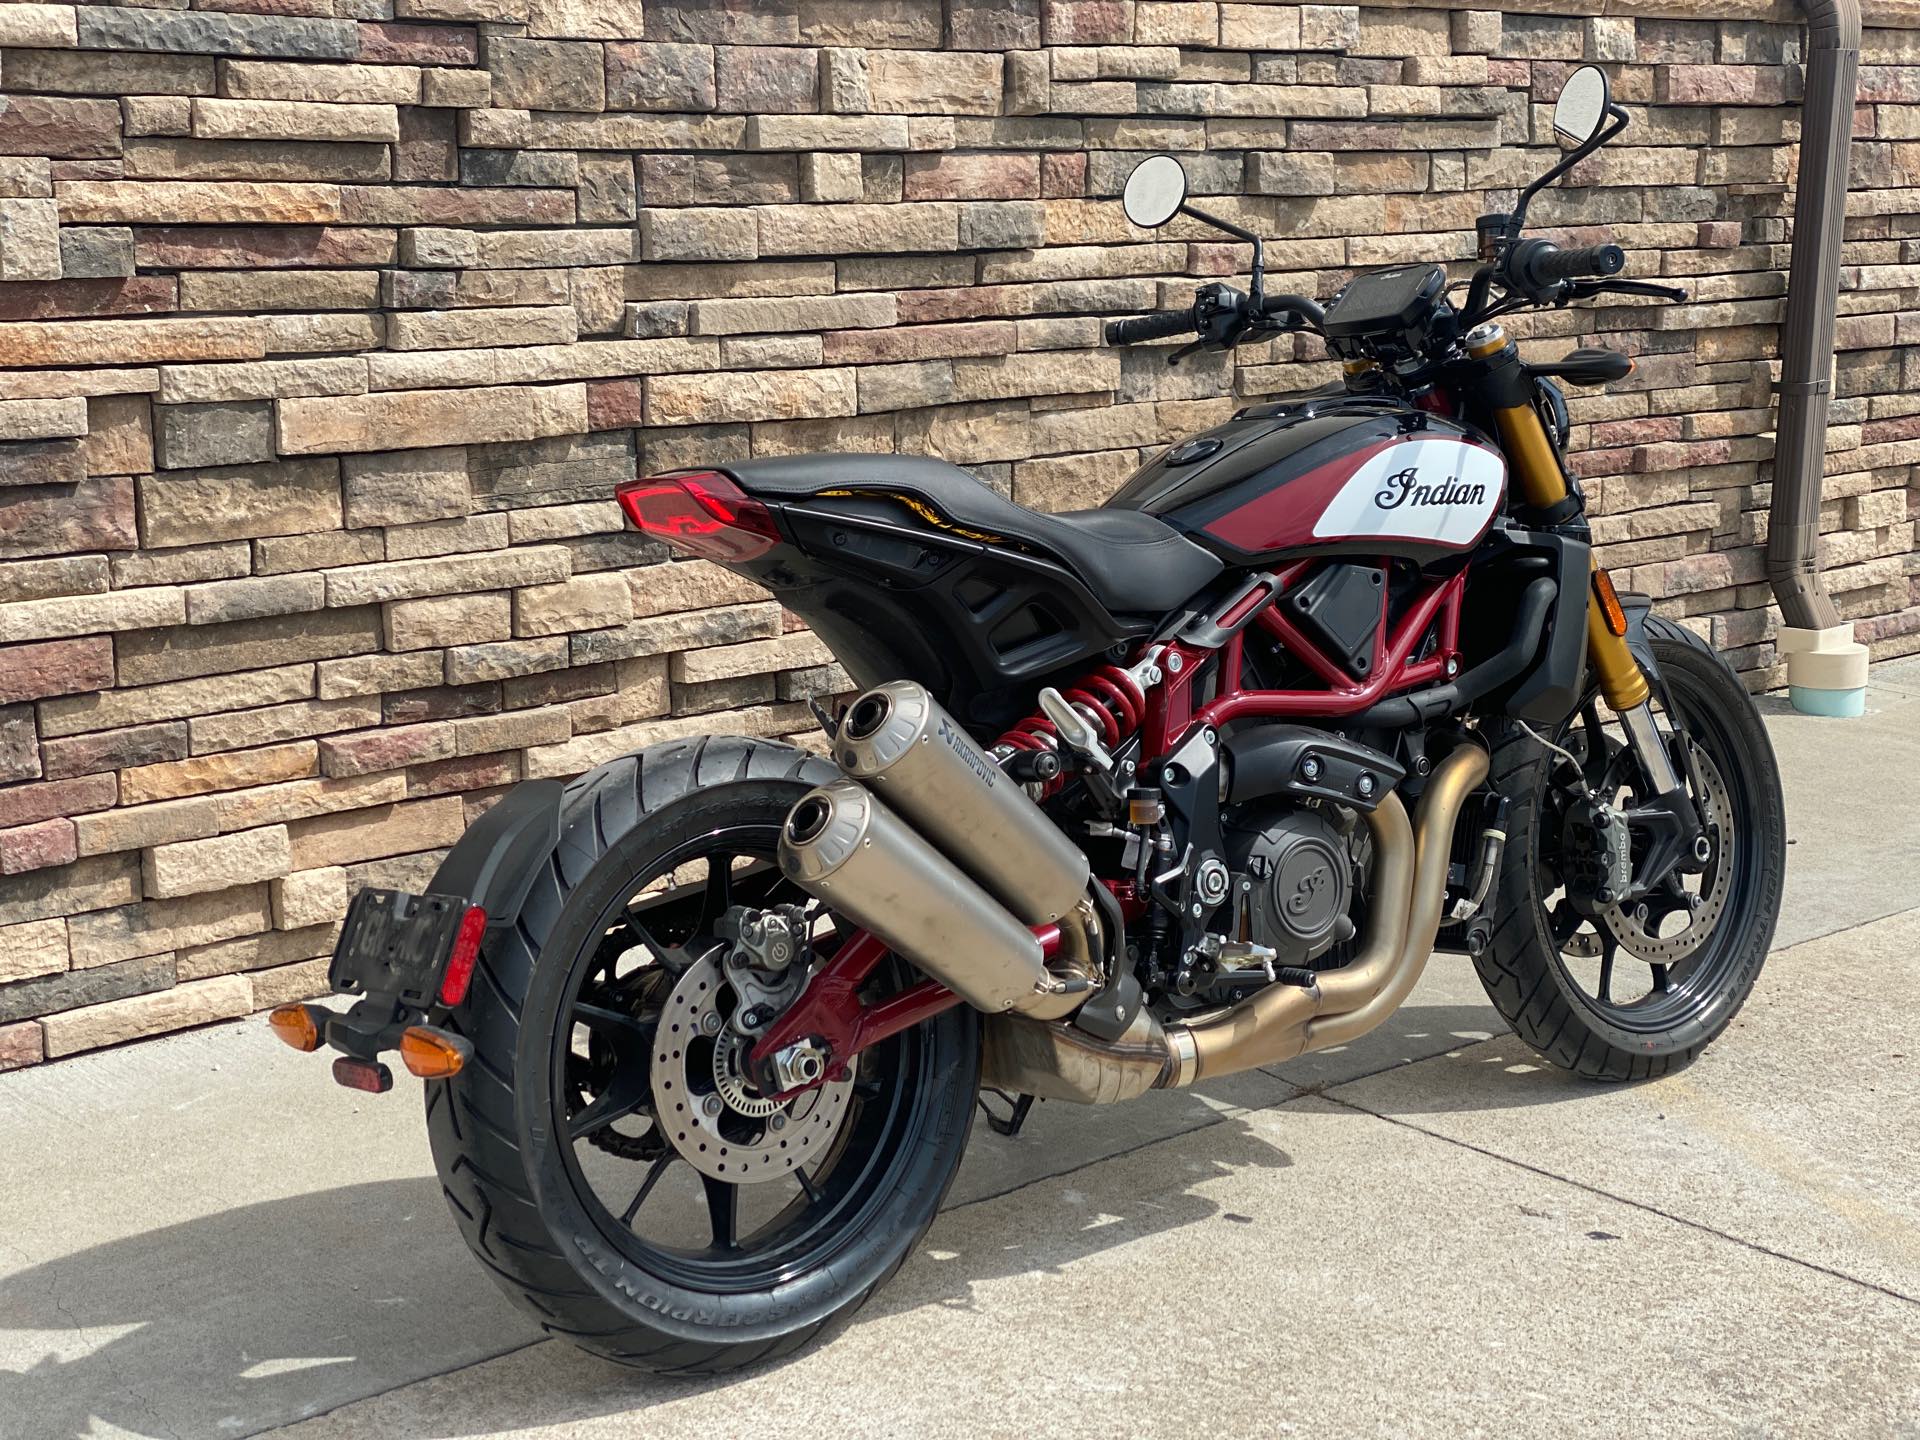 2019 Indian FTR 1200 S at Head Indian Motorcycle